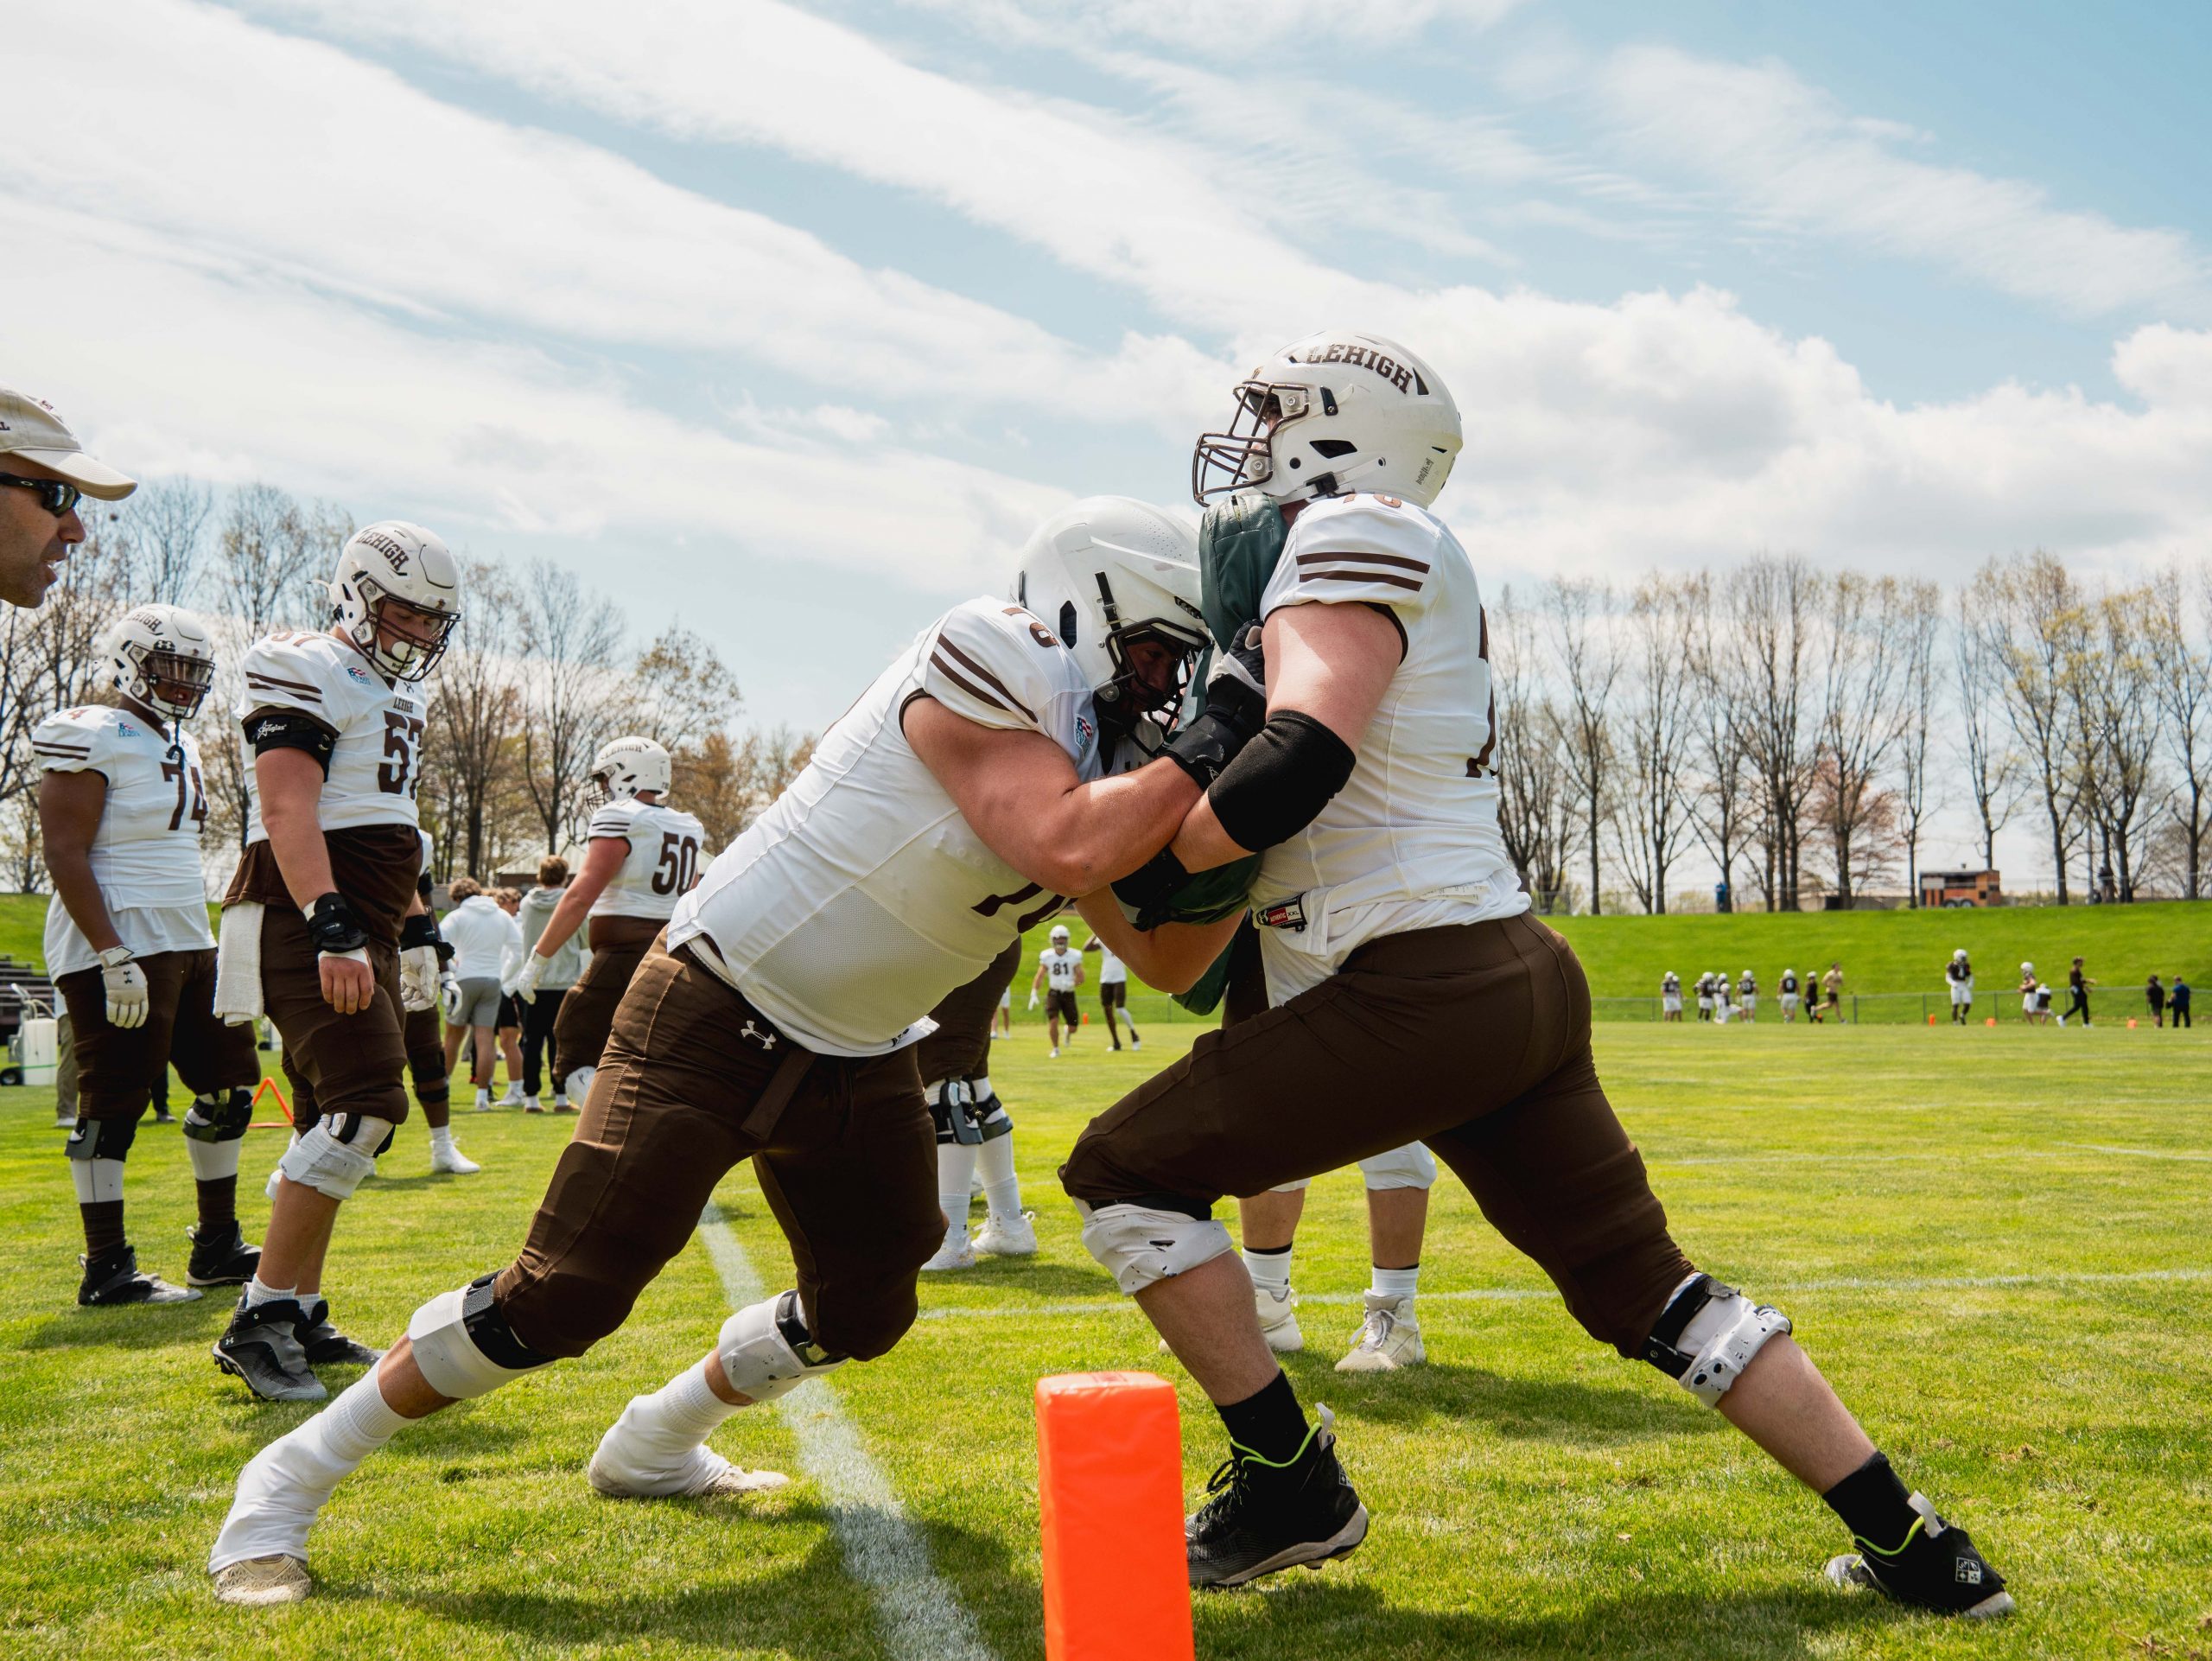 Lehigh Brown/White Scrimmage Focuses on Football Fun And Prep For Upcoming Season